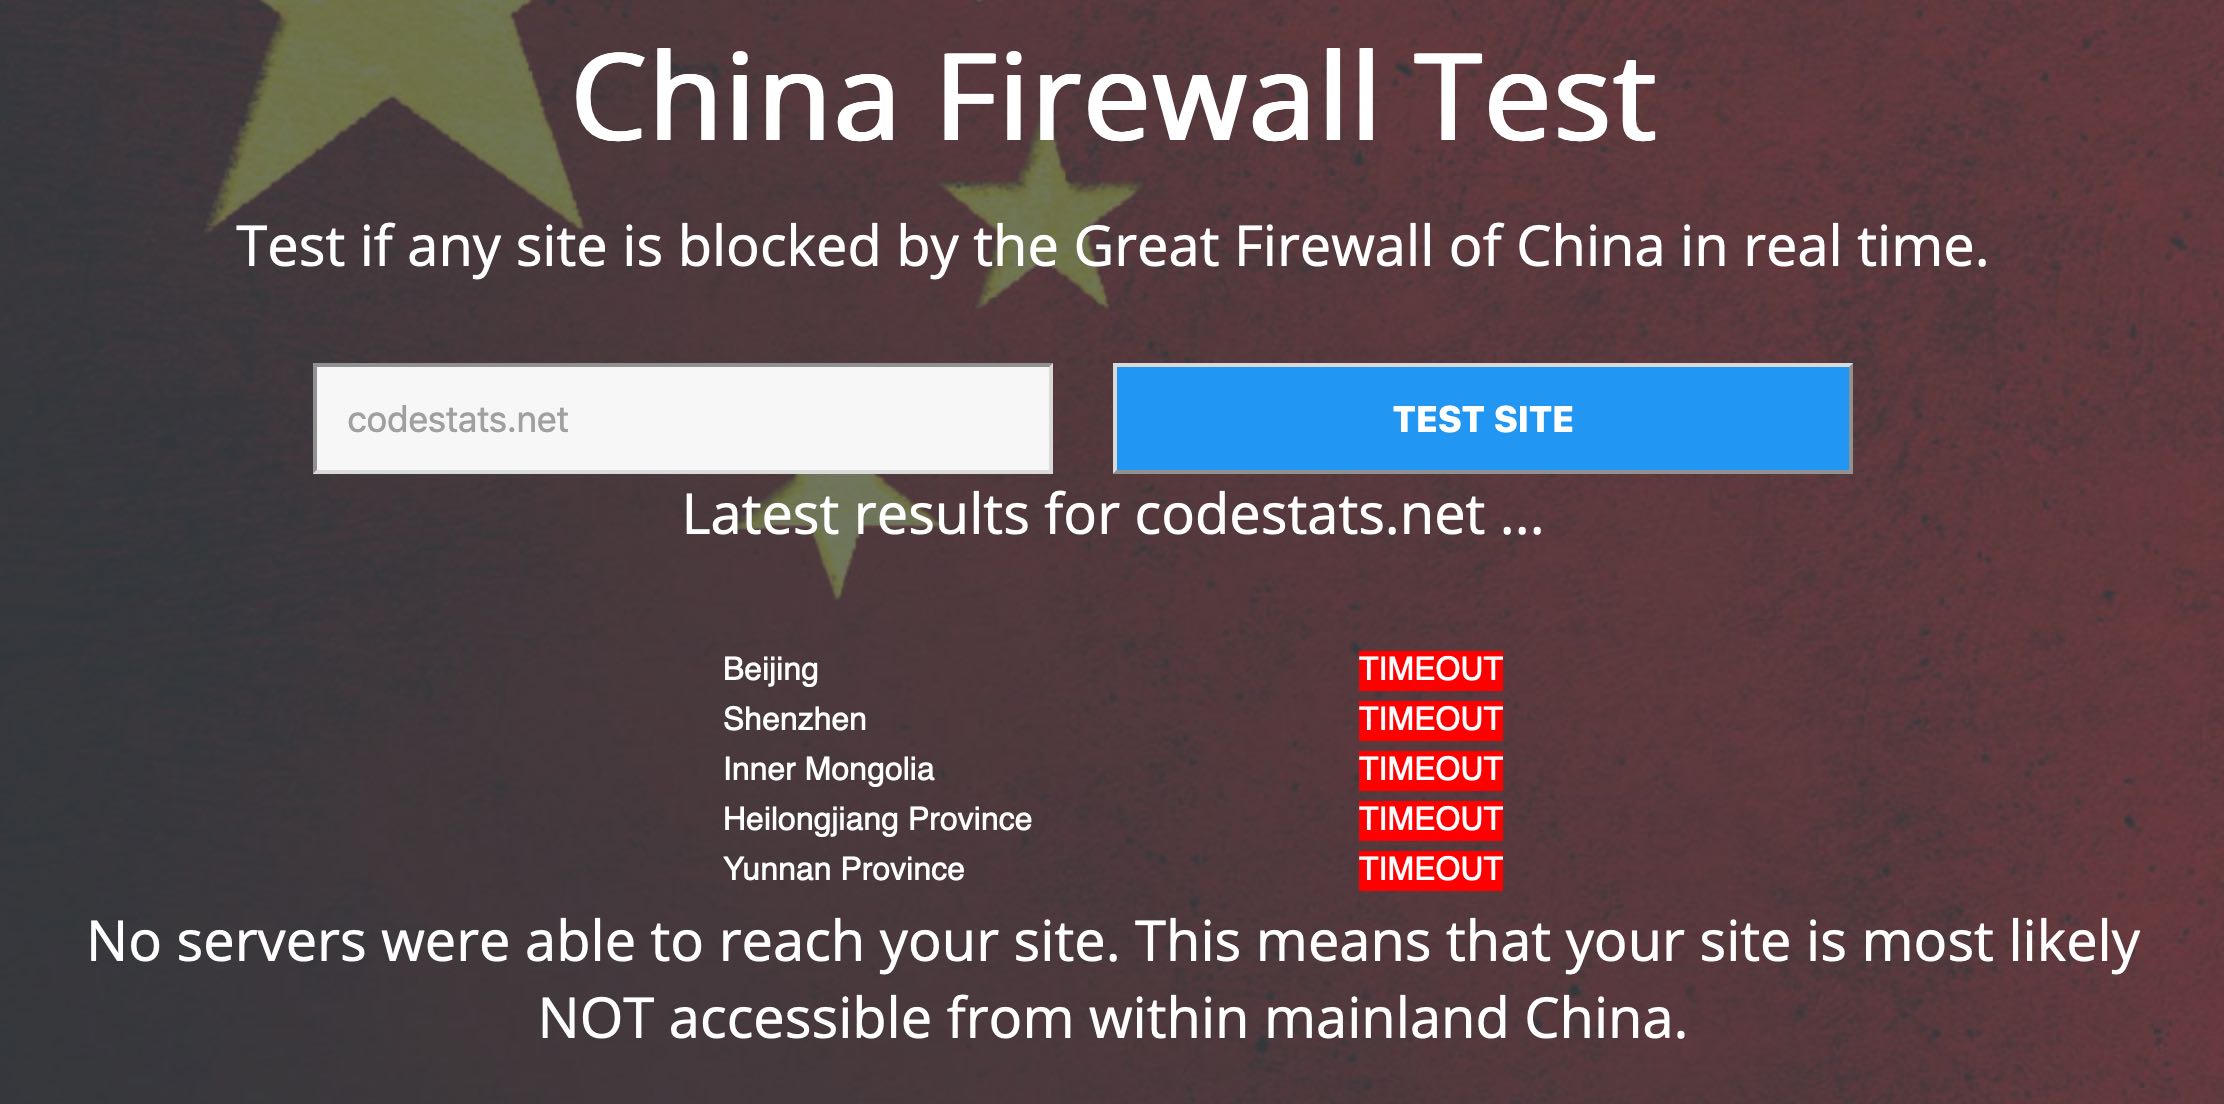 Screenshot from website showing codestats.net is not accessible from China